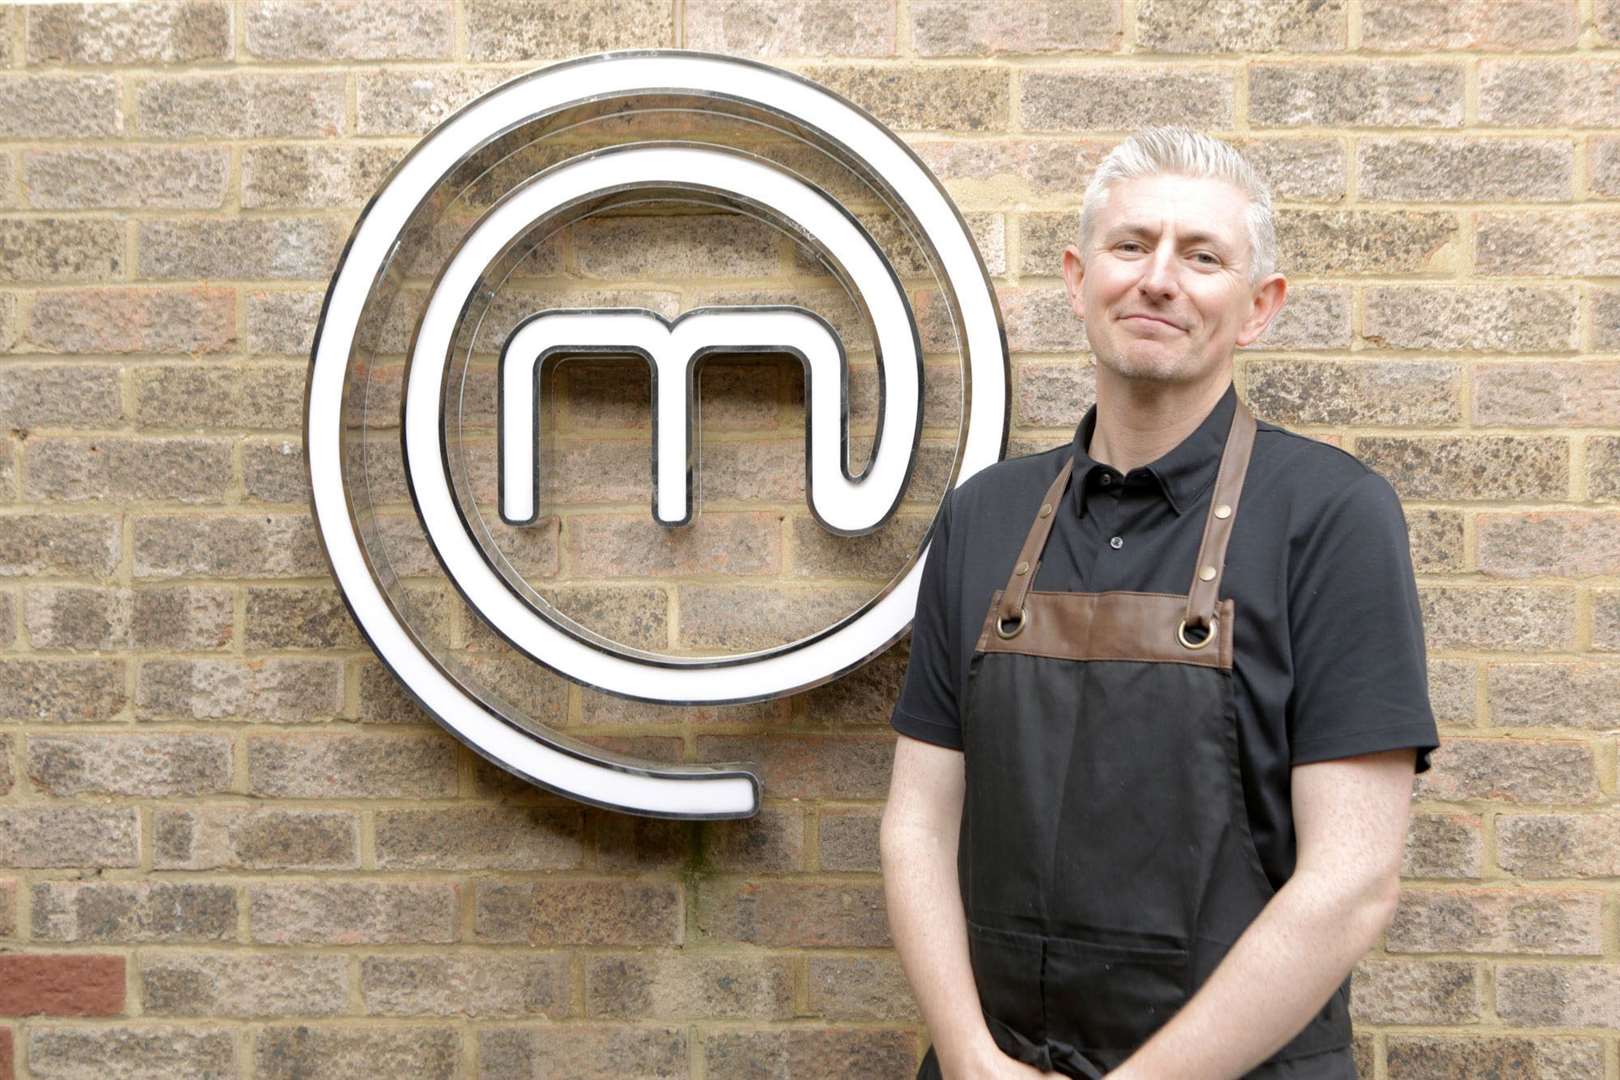 Bearsted's James Skelton had a good run on BBC's MasterChef. Picture: BBC